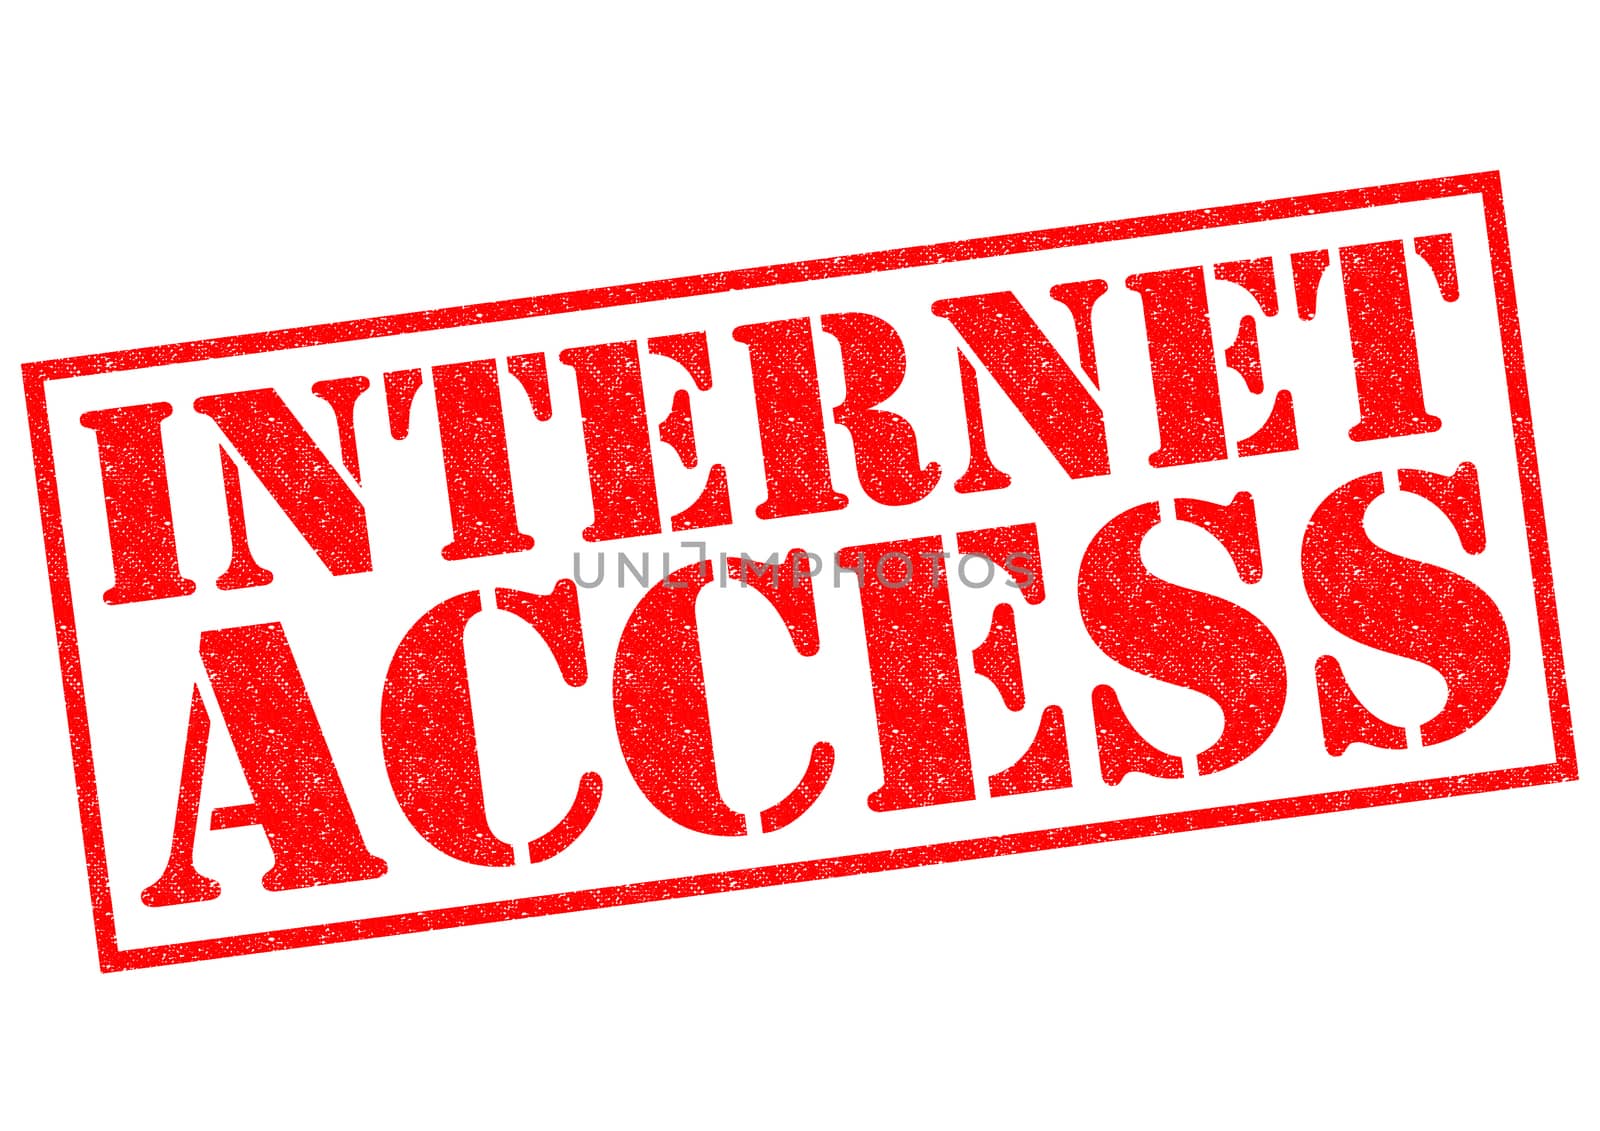 INTERNET ACCESS red Rubber Stamp over a white background.